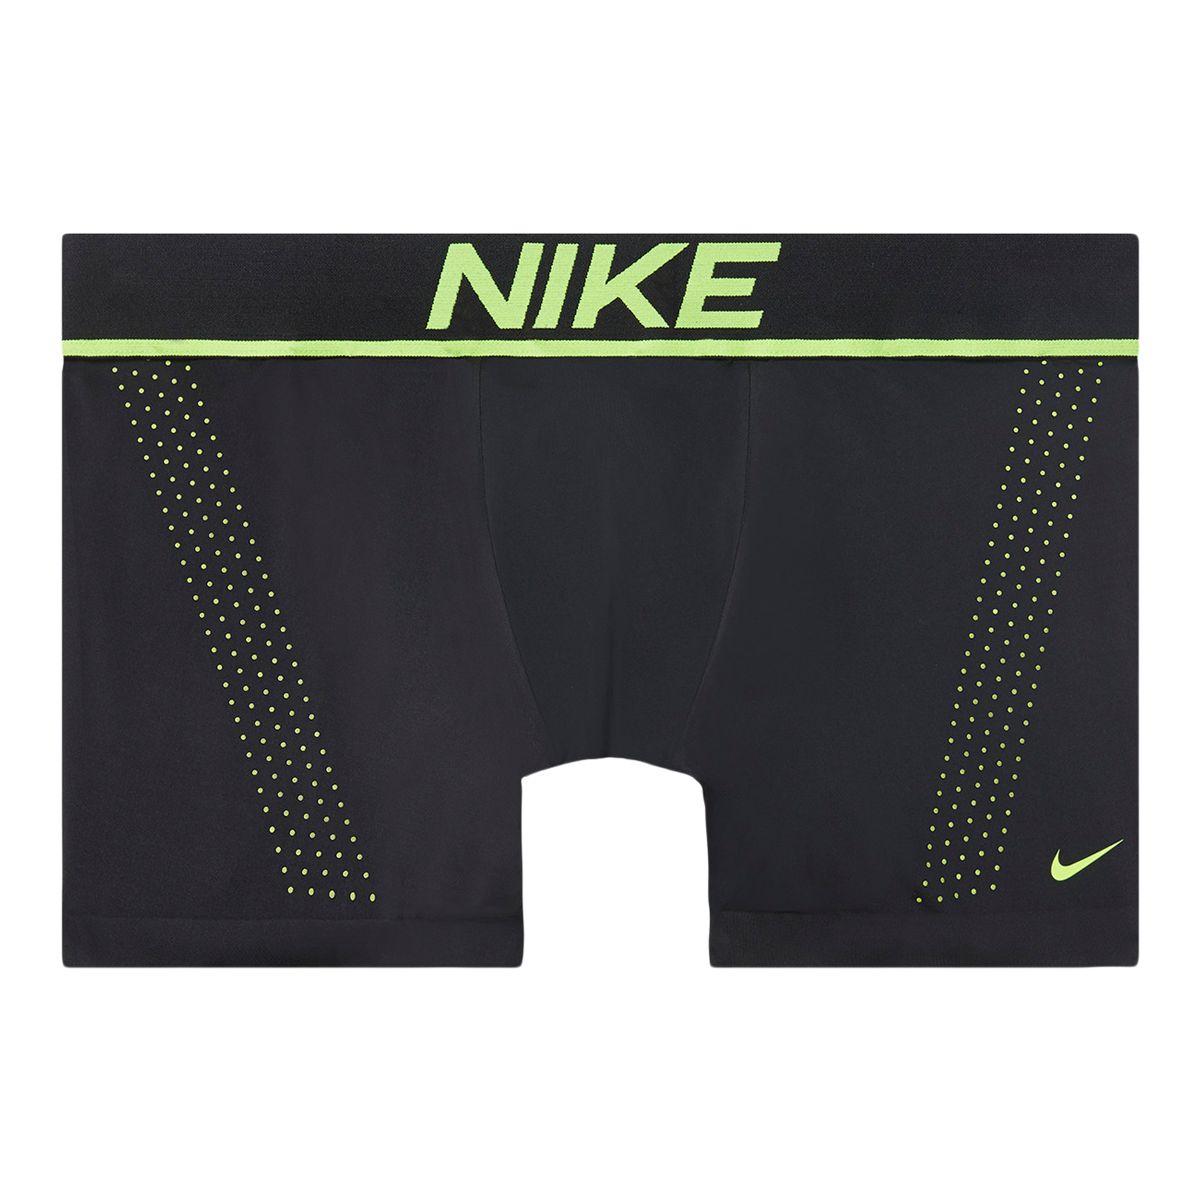 Nike Men's Essential Knit Boxer Brief - 3 Pack